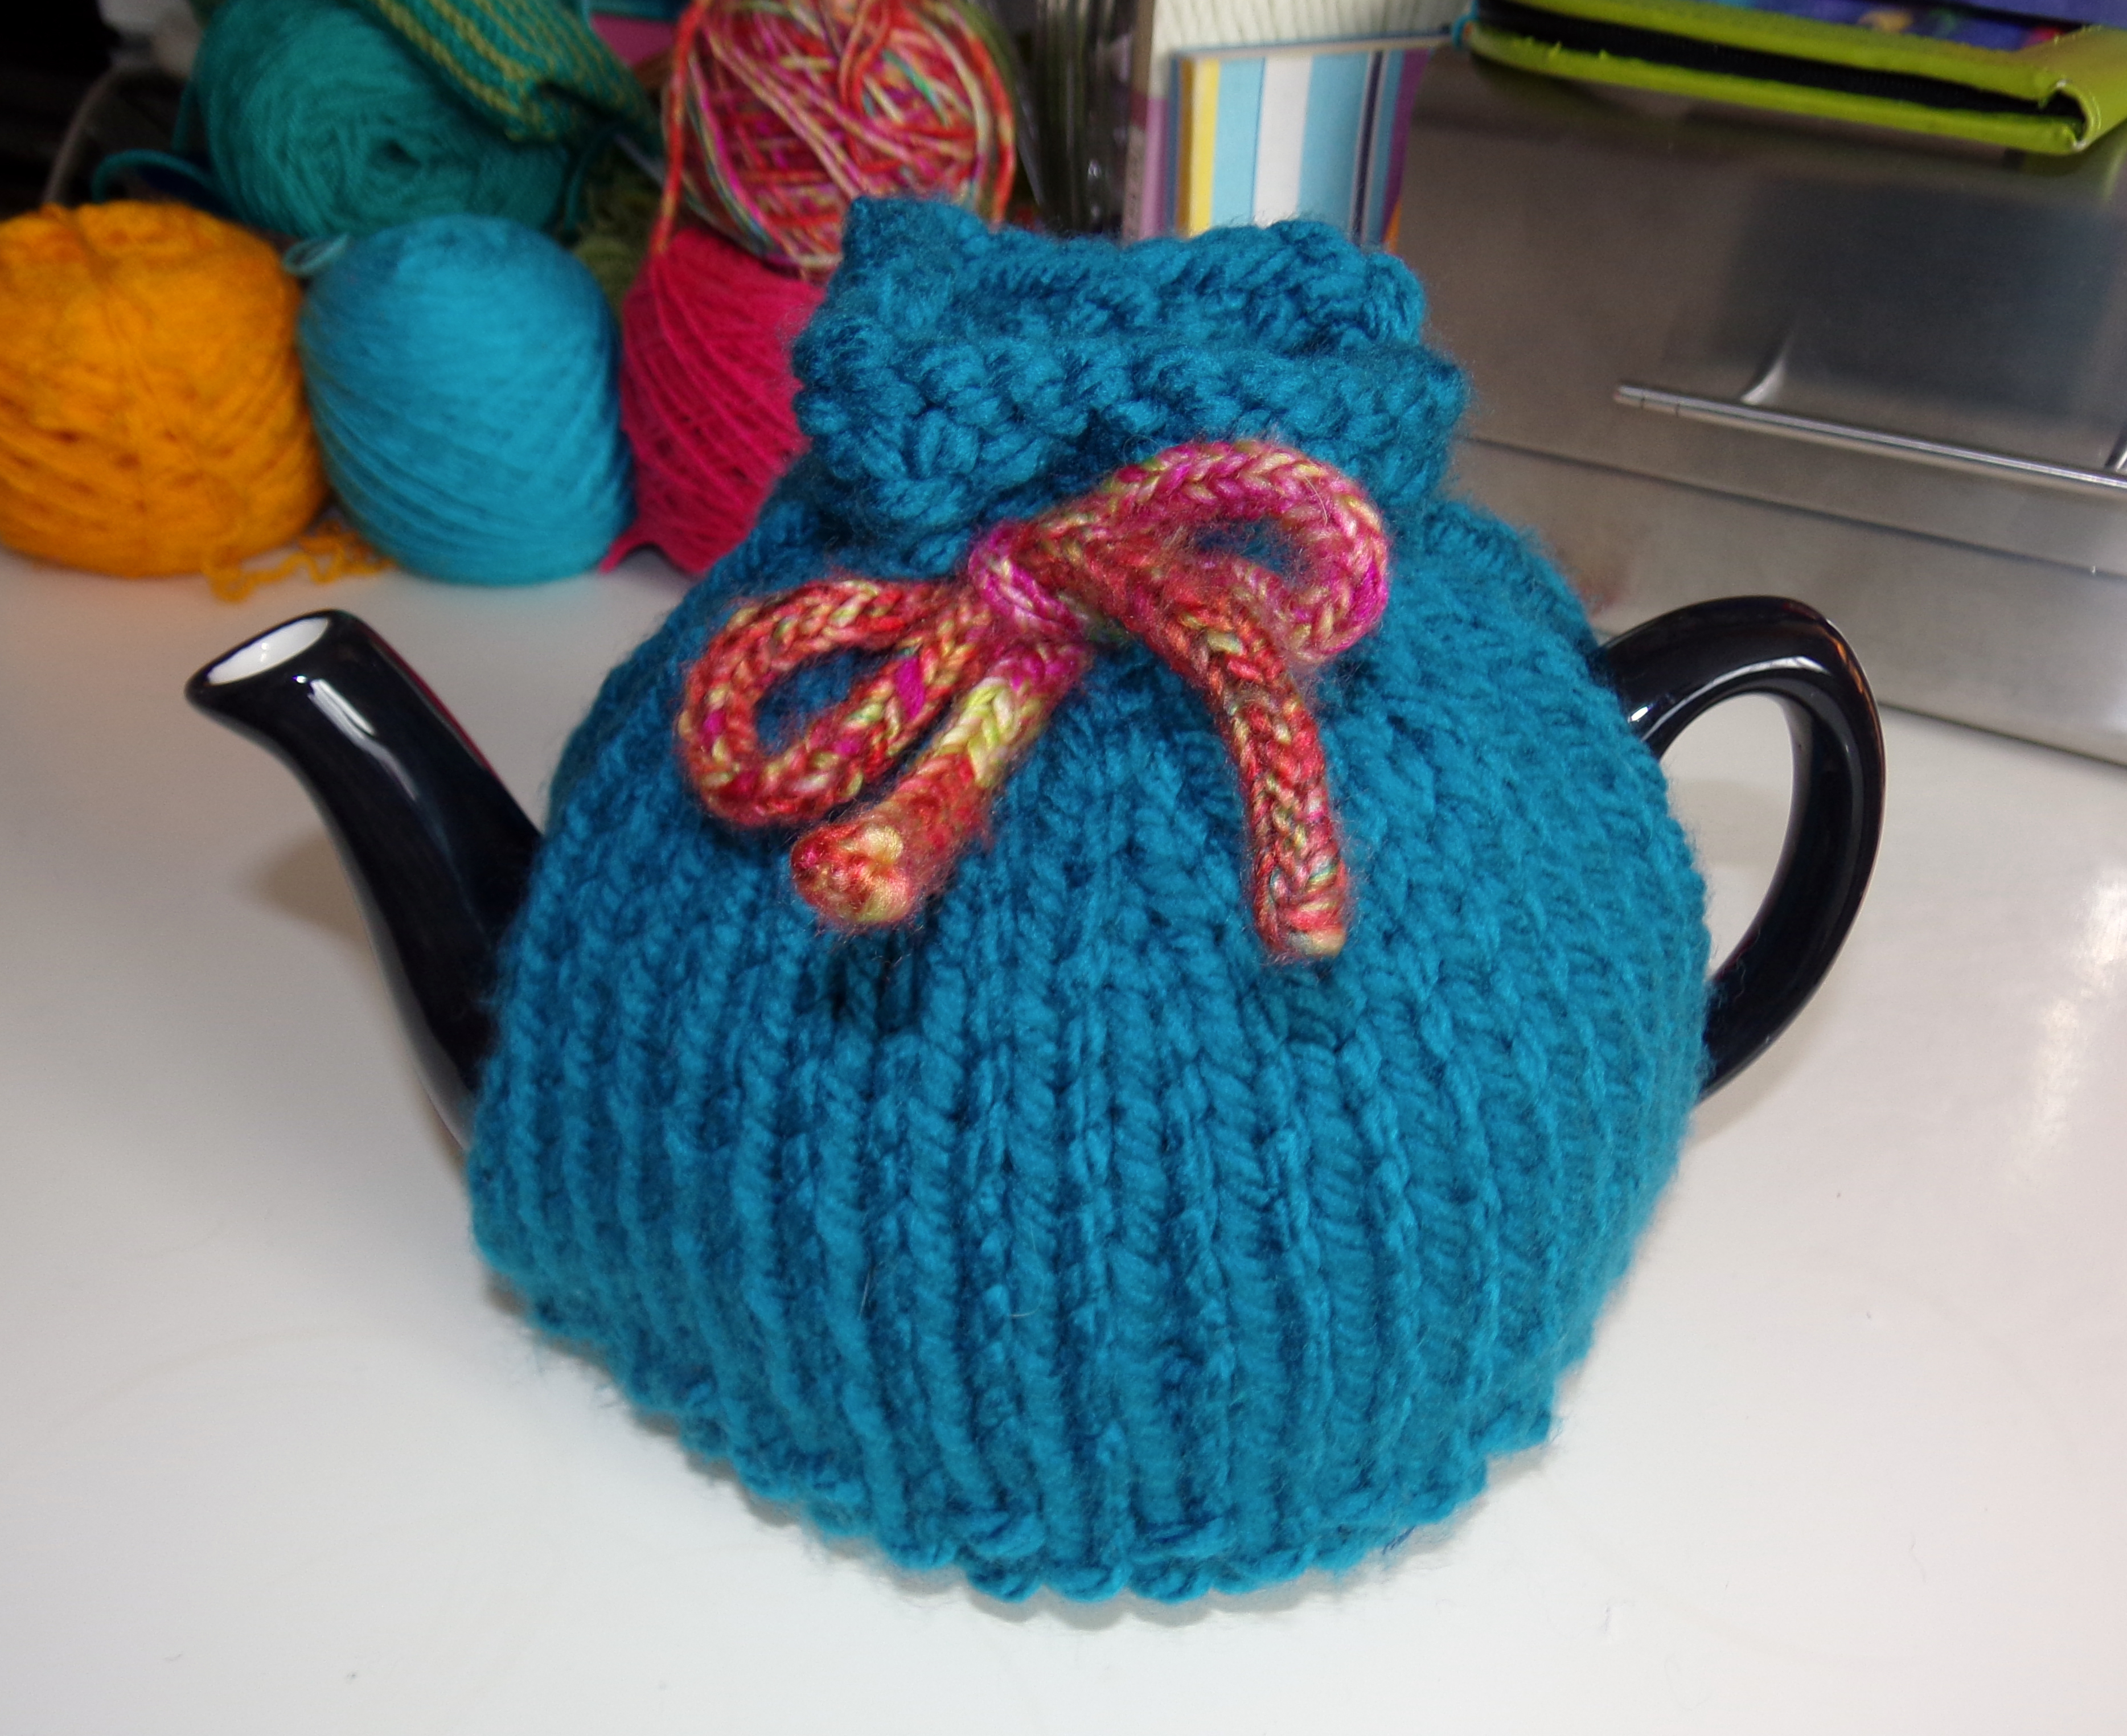 Tea Cosy Patterns To Knit Three Free Tea Cosy Patterns Reviewed Or Why Tea Pots Are Better